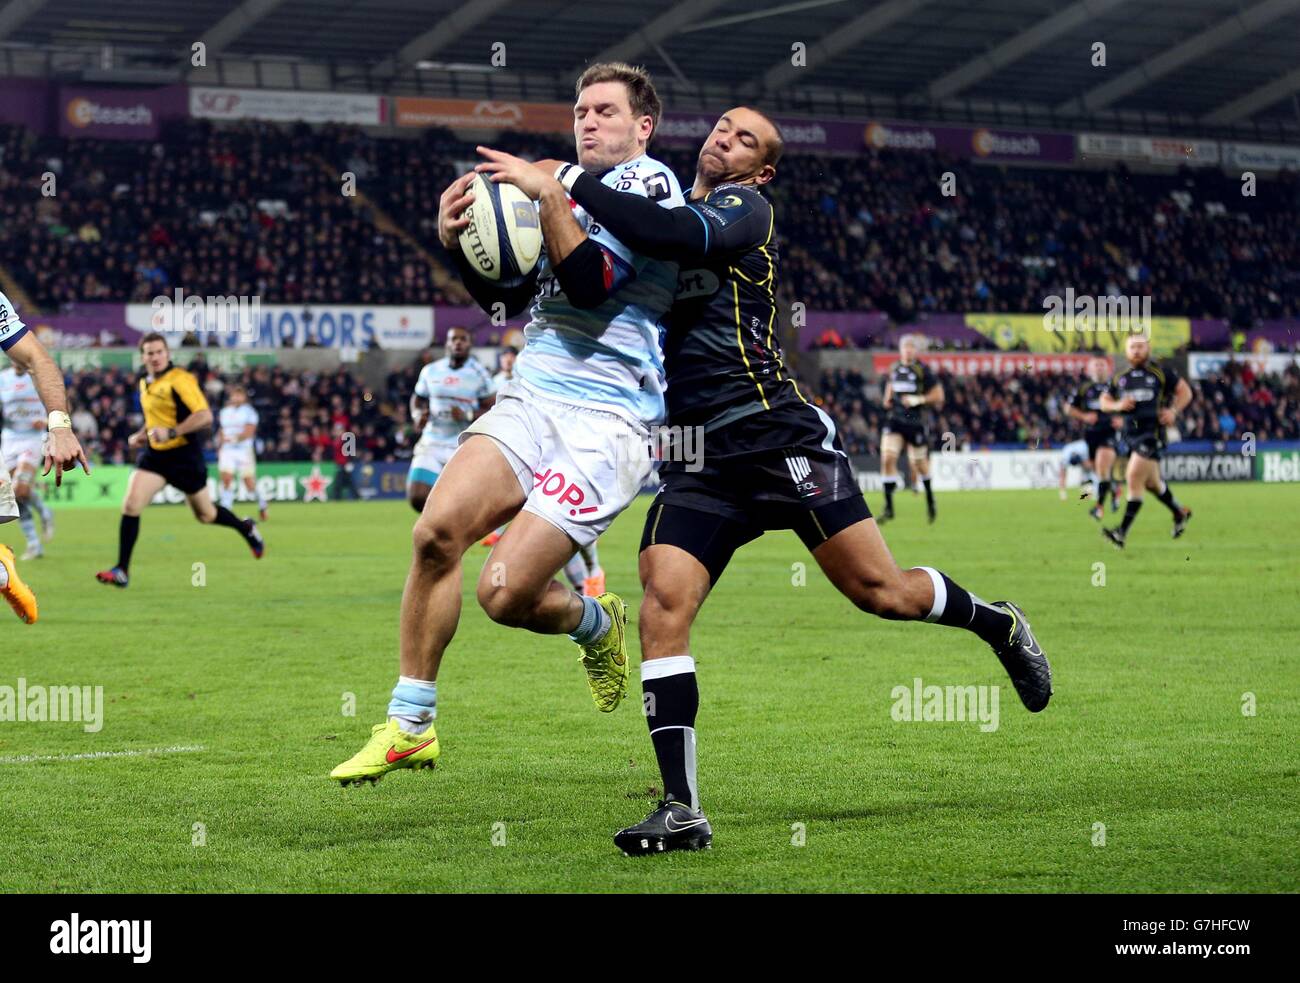 Racing Metro's Adrien Plante is tackled by Ospreys Eli Walker during the Pool Five match of the European Rugby Champions Cup at the Liberty Stadium, Swansea. Stock Photo